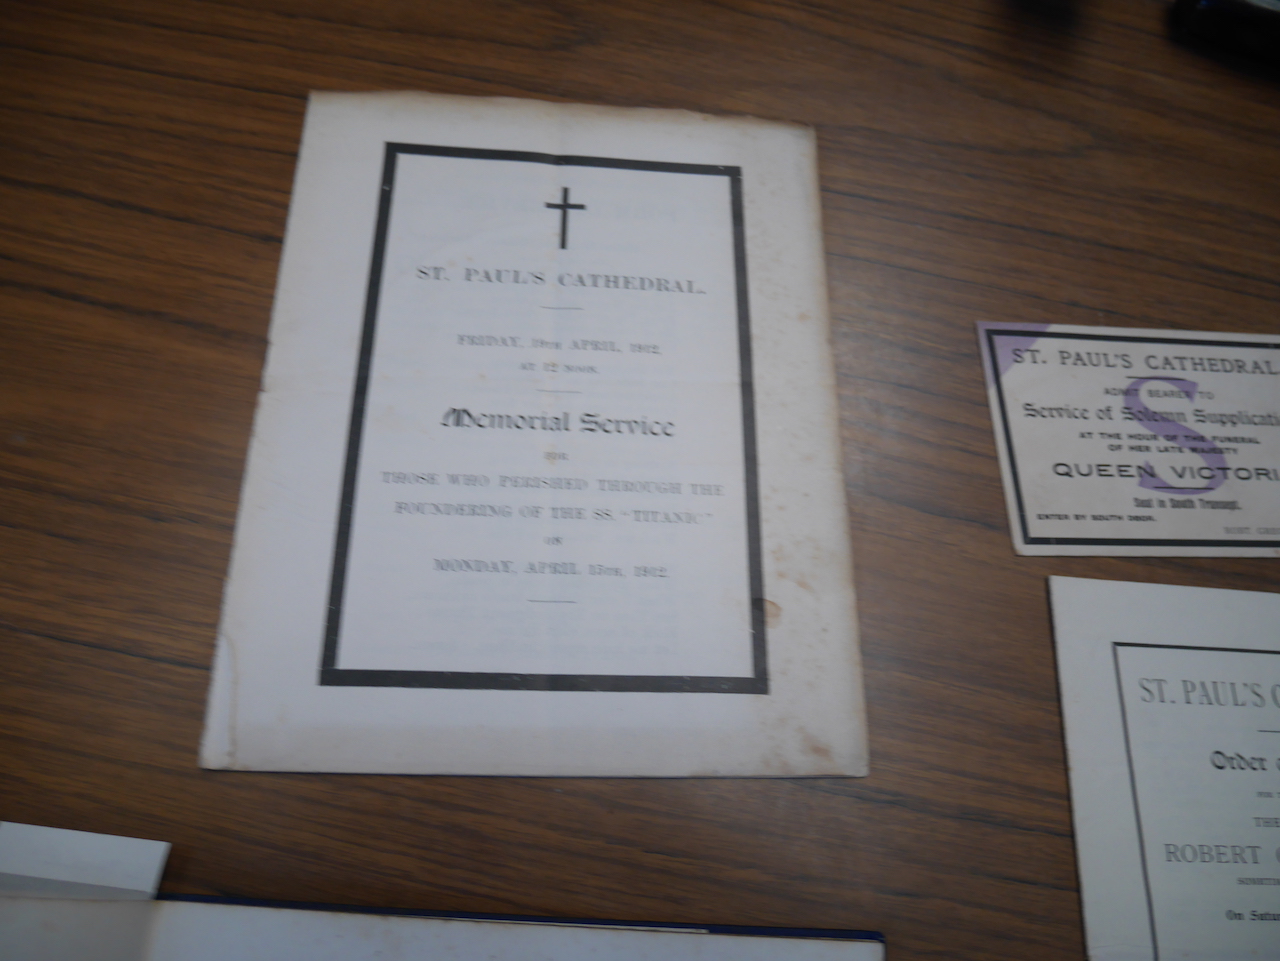 Memorial Programmes from St Paul's Cathedral SS Titanic, Queen Victoria, Kind Edward VII etc - Image 8 of 12